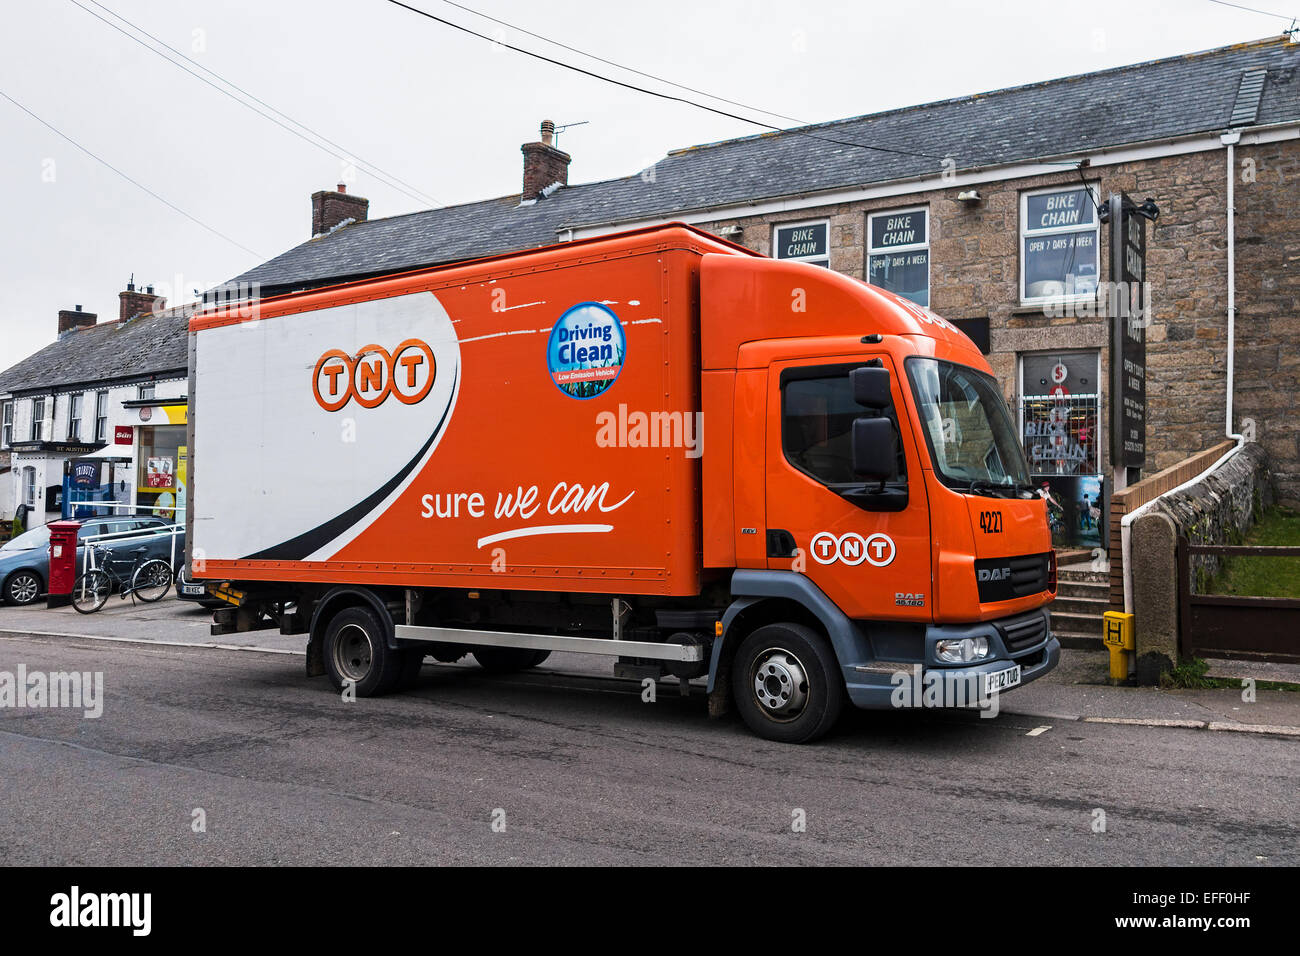 TNT delivery van parked on road Stock Photo